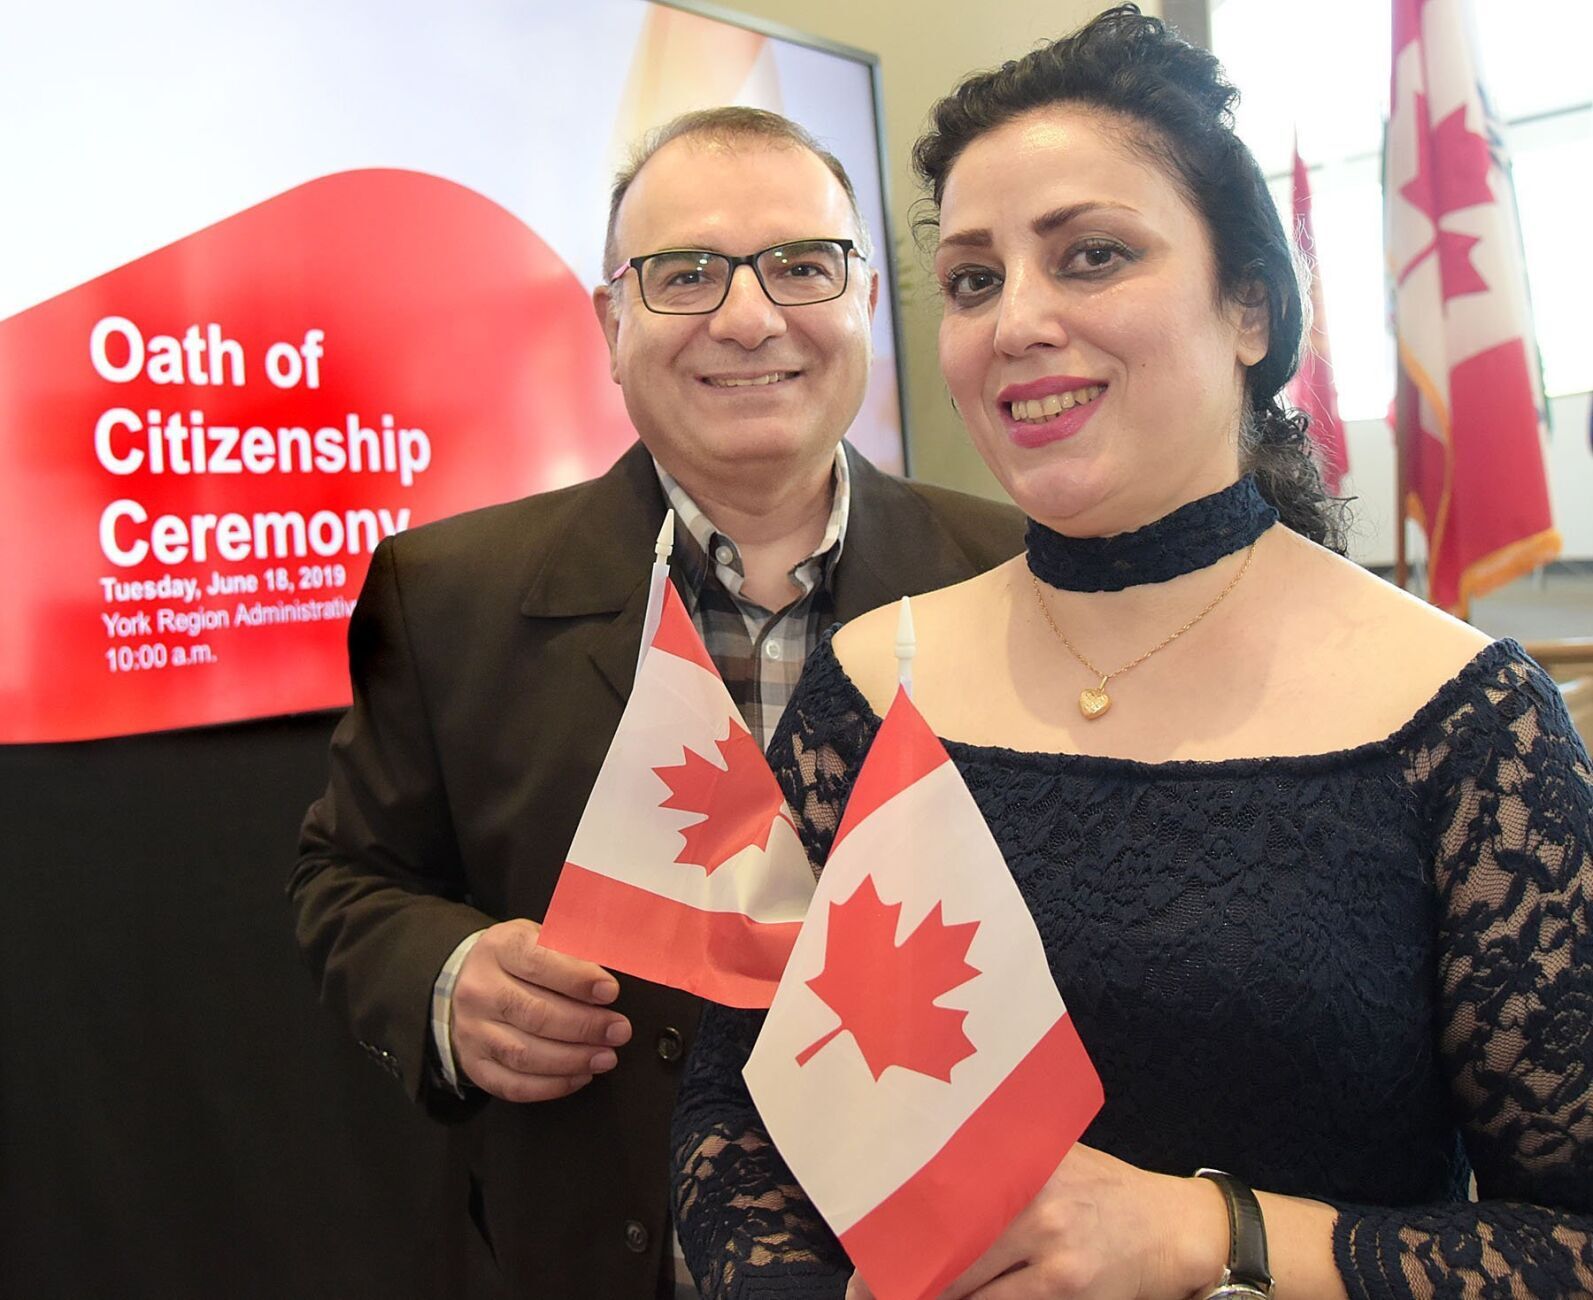 So happy to get my Canadian citizenship': Thornhill newcomer